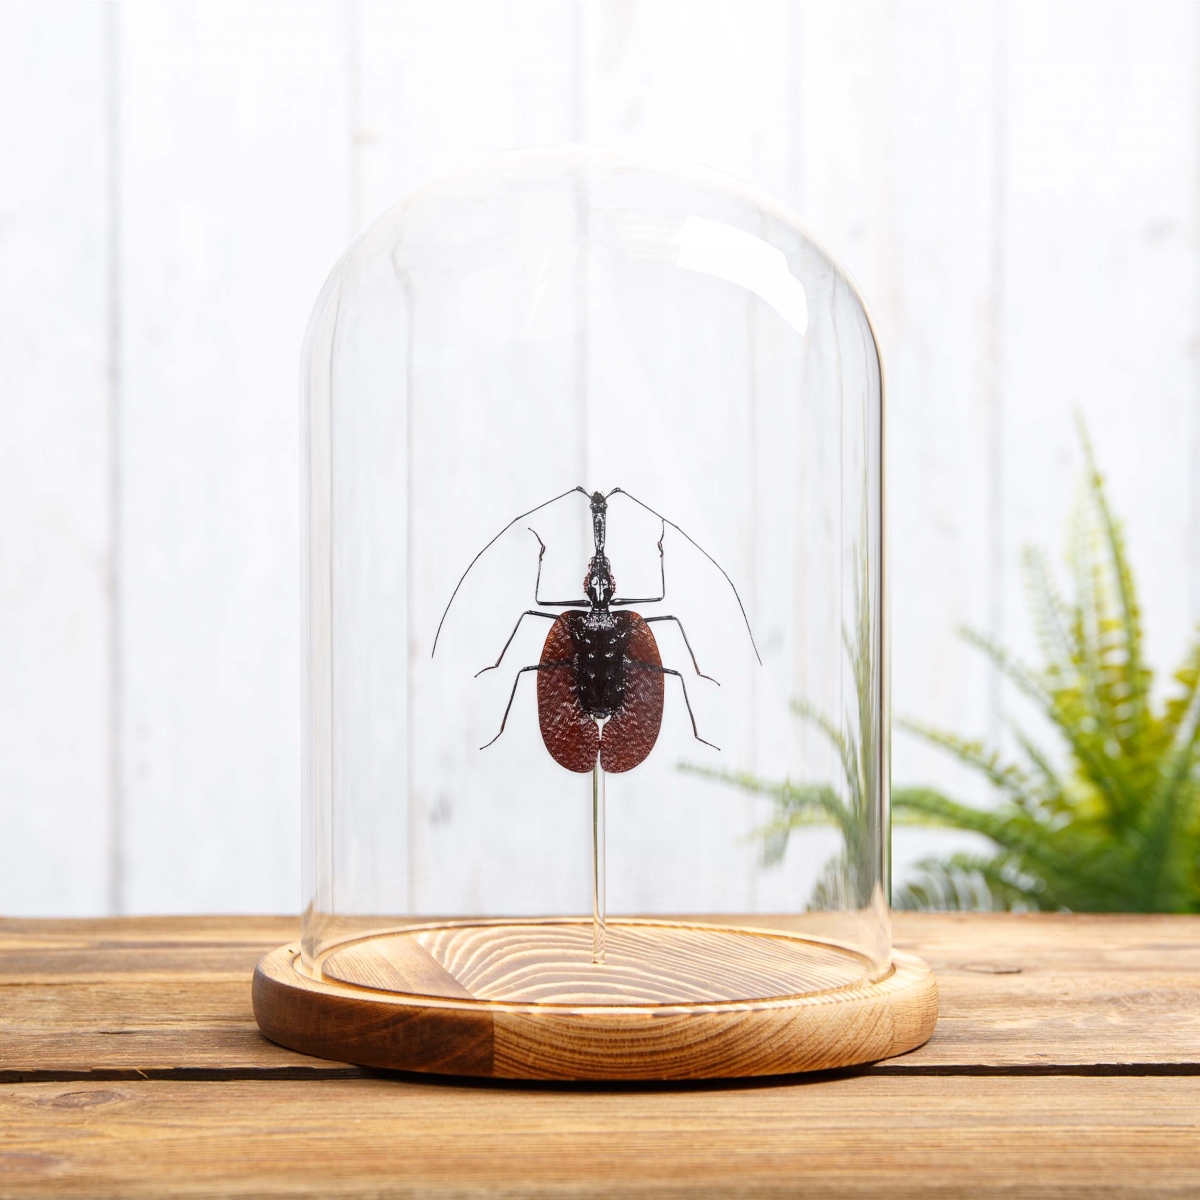 Violin Beetle in Glass Dome with Wooden Base (Mormolyce phyllodes)